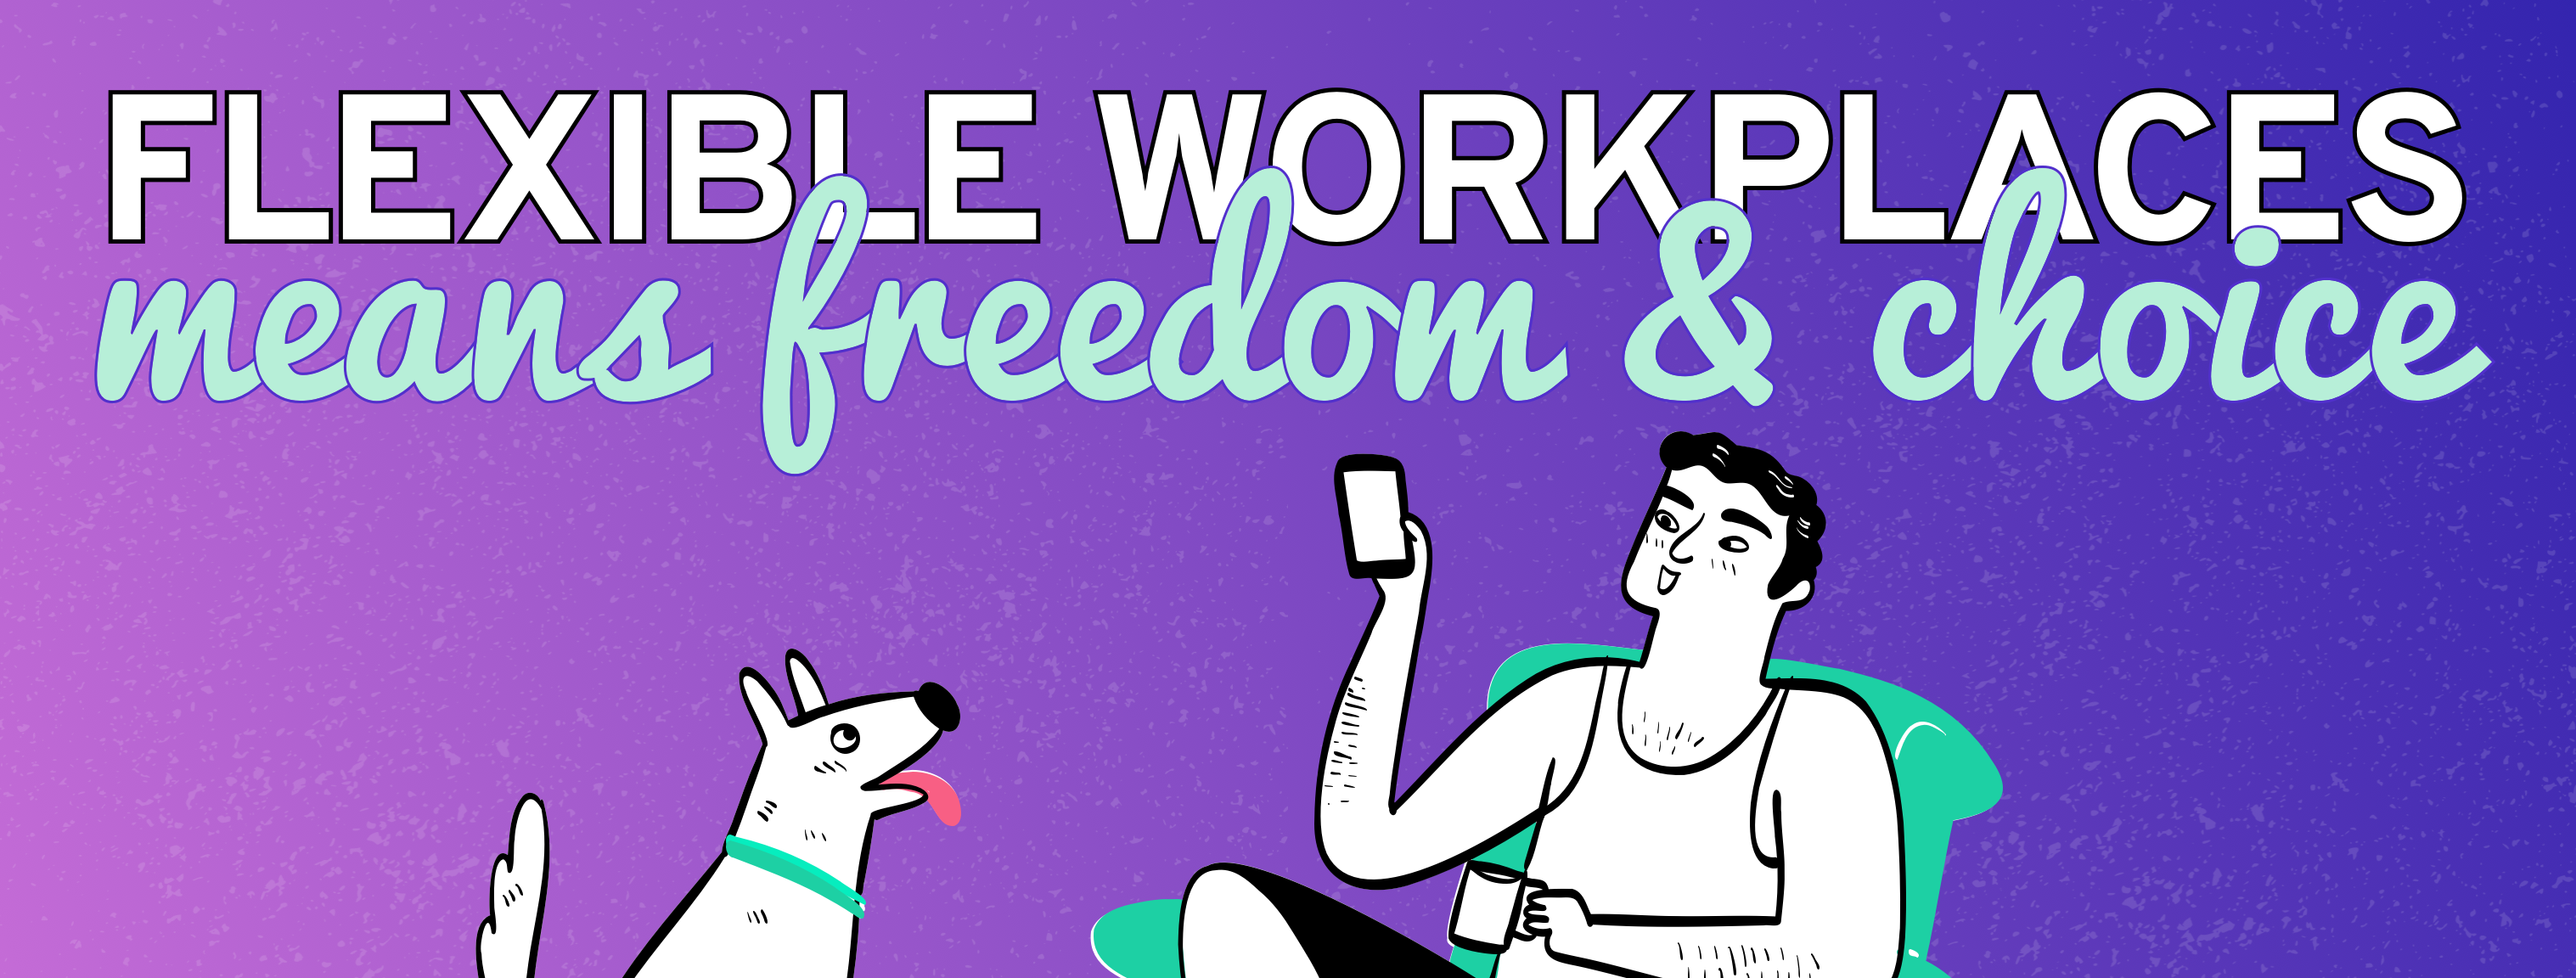 job-freedom-and-choice-banner